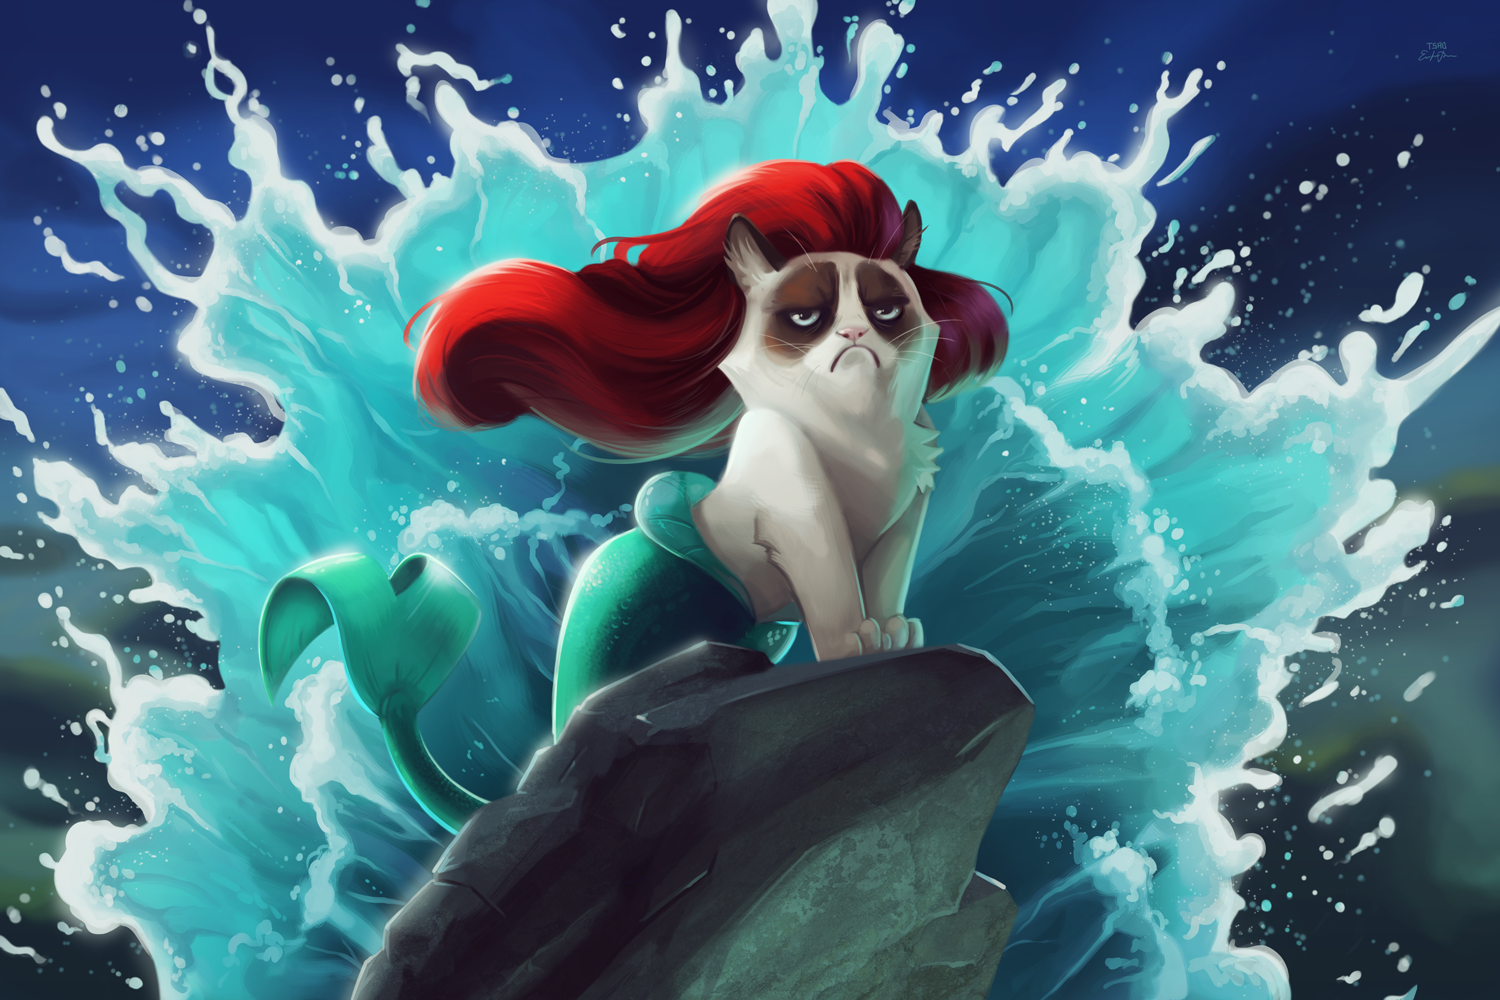 This is What Happens When You Mix Grumpy Cat and Disney Films